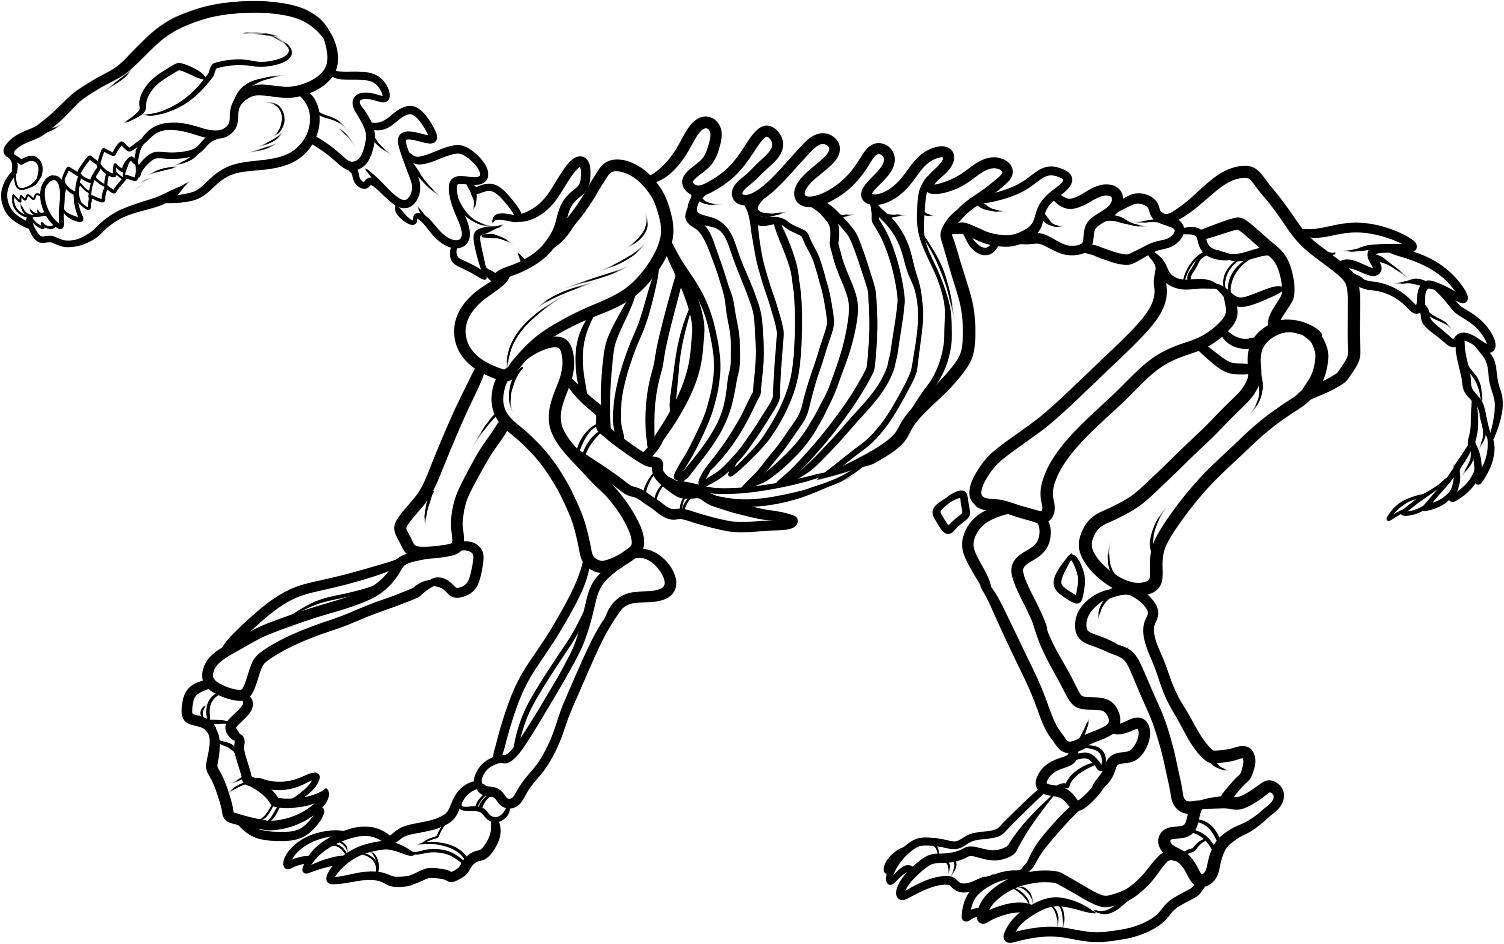 Dinosaur Skeleton Coloring Page   Clipart Panda   Free Clipart Images